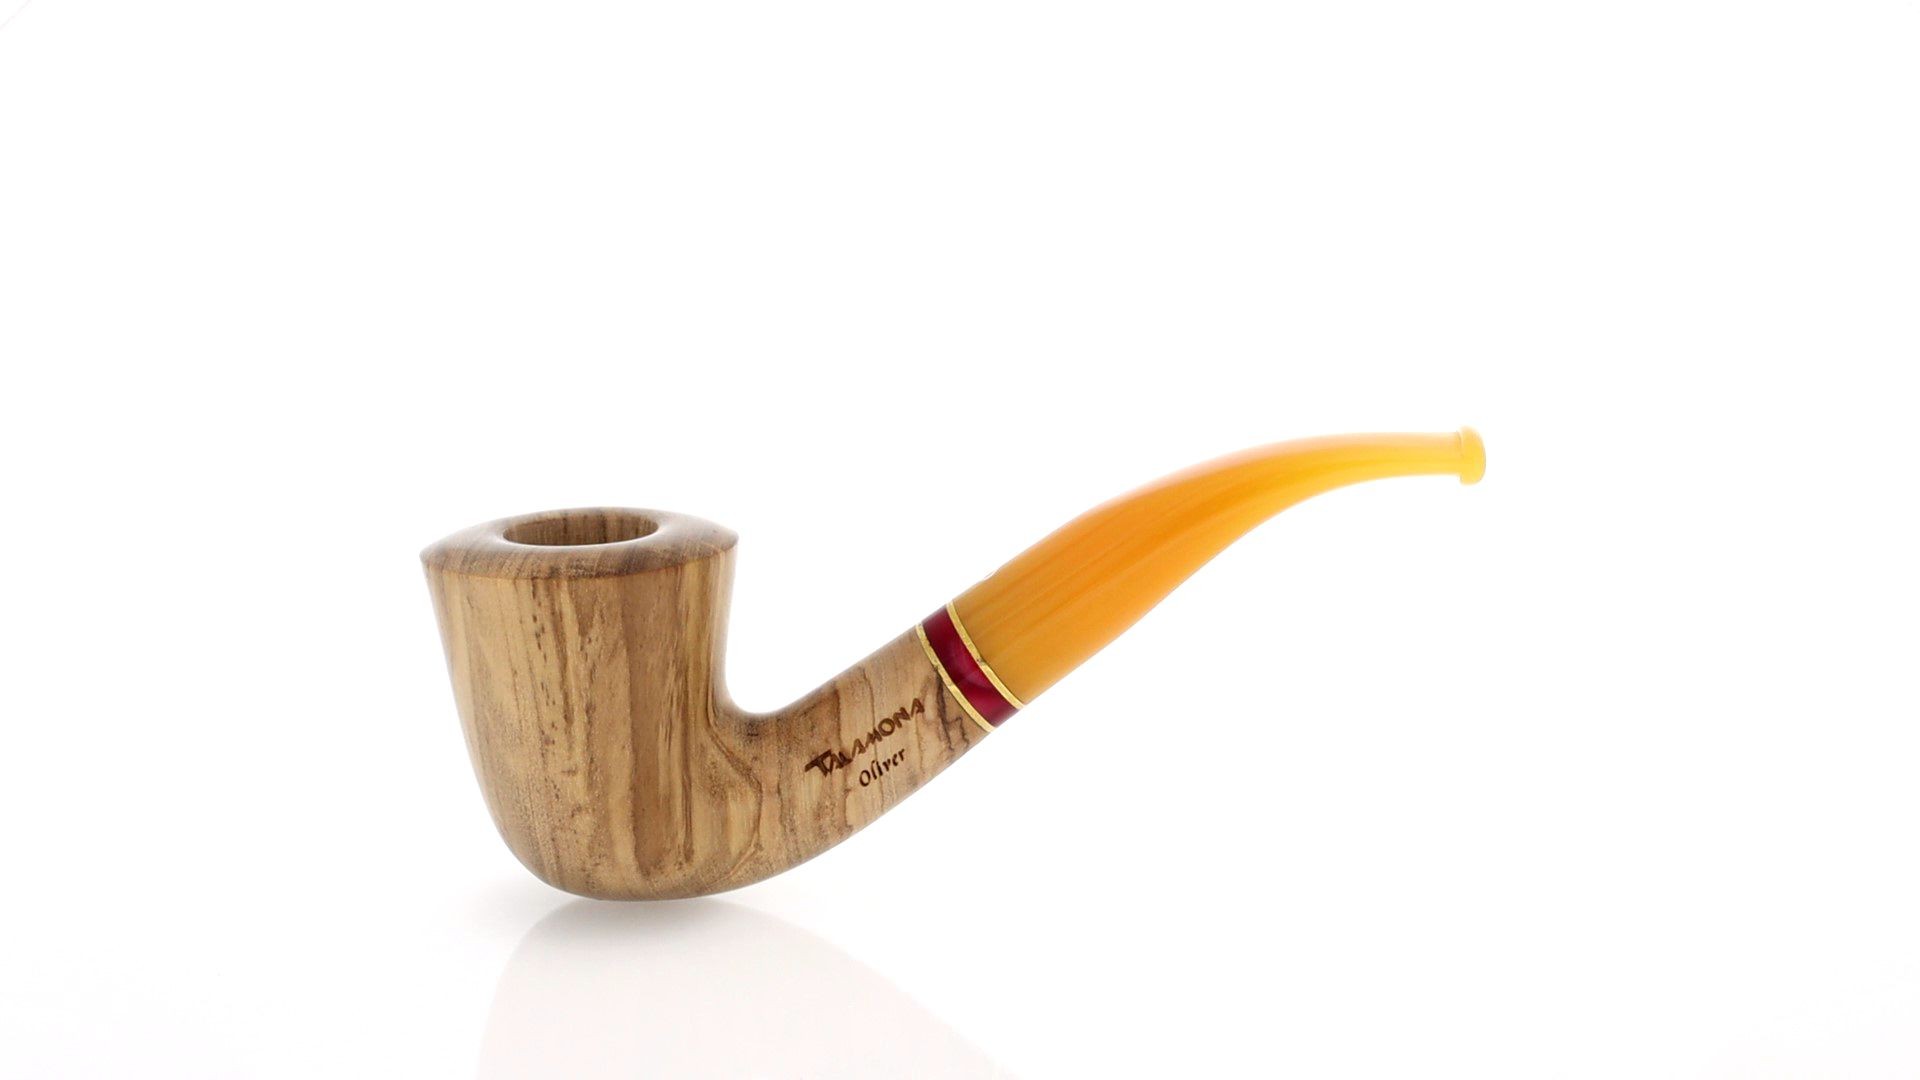 Oliver series pipe, natural olive finish, curved Dublin shape